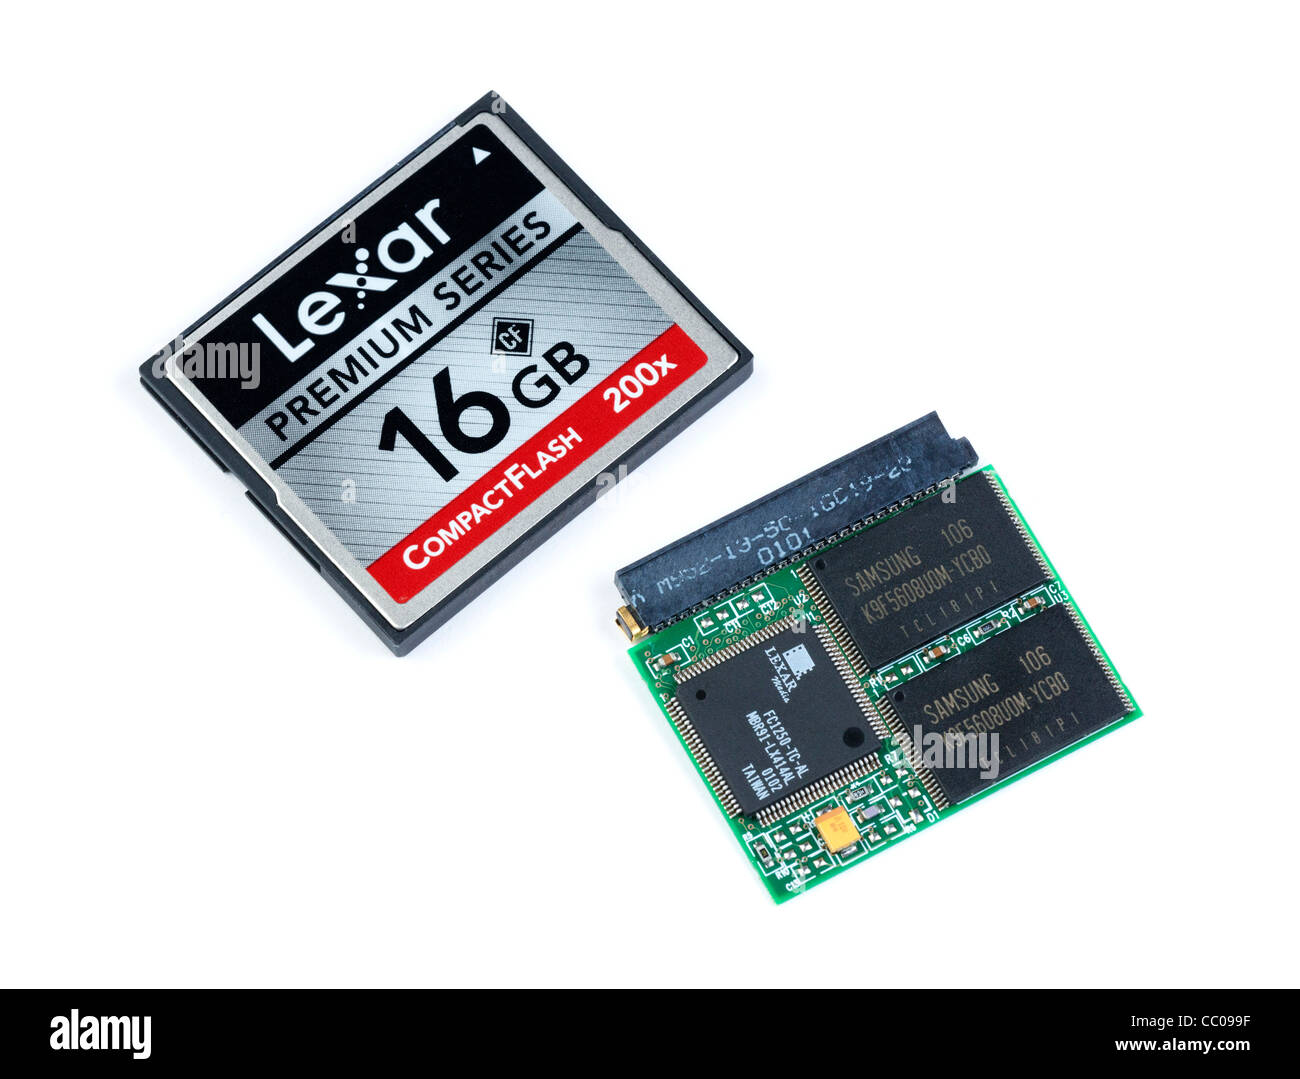 Portable hard drive card reader compact flash card attached.  Editorial use only Stock Photo - Alamy